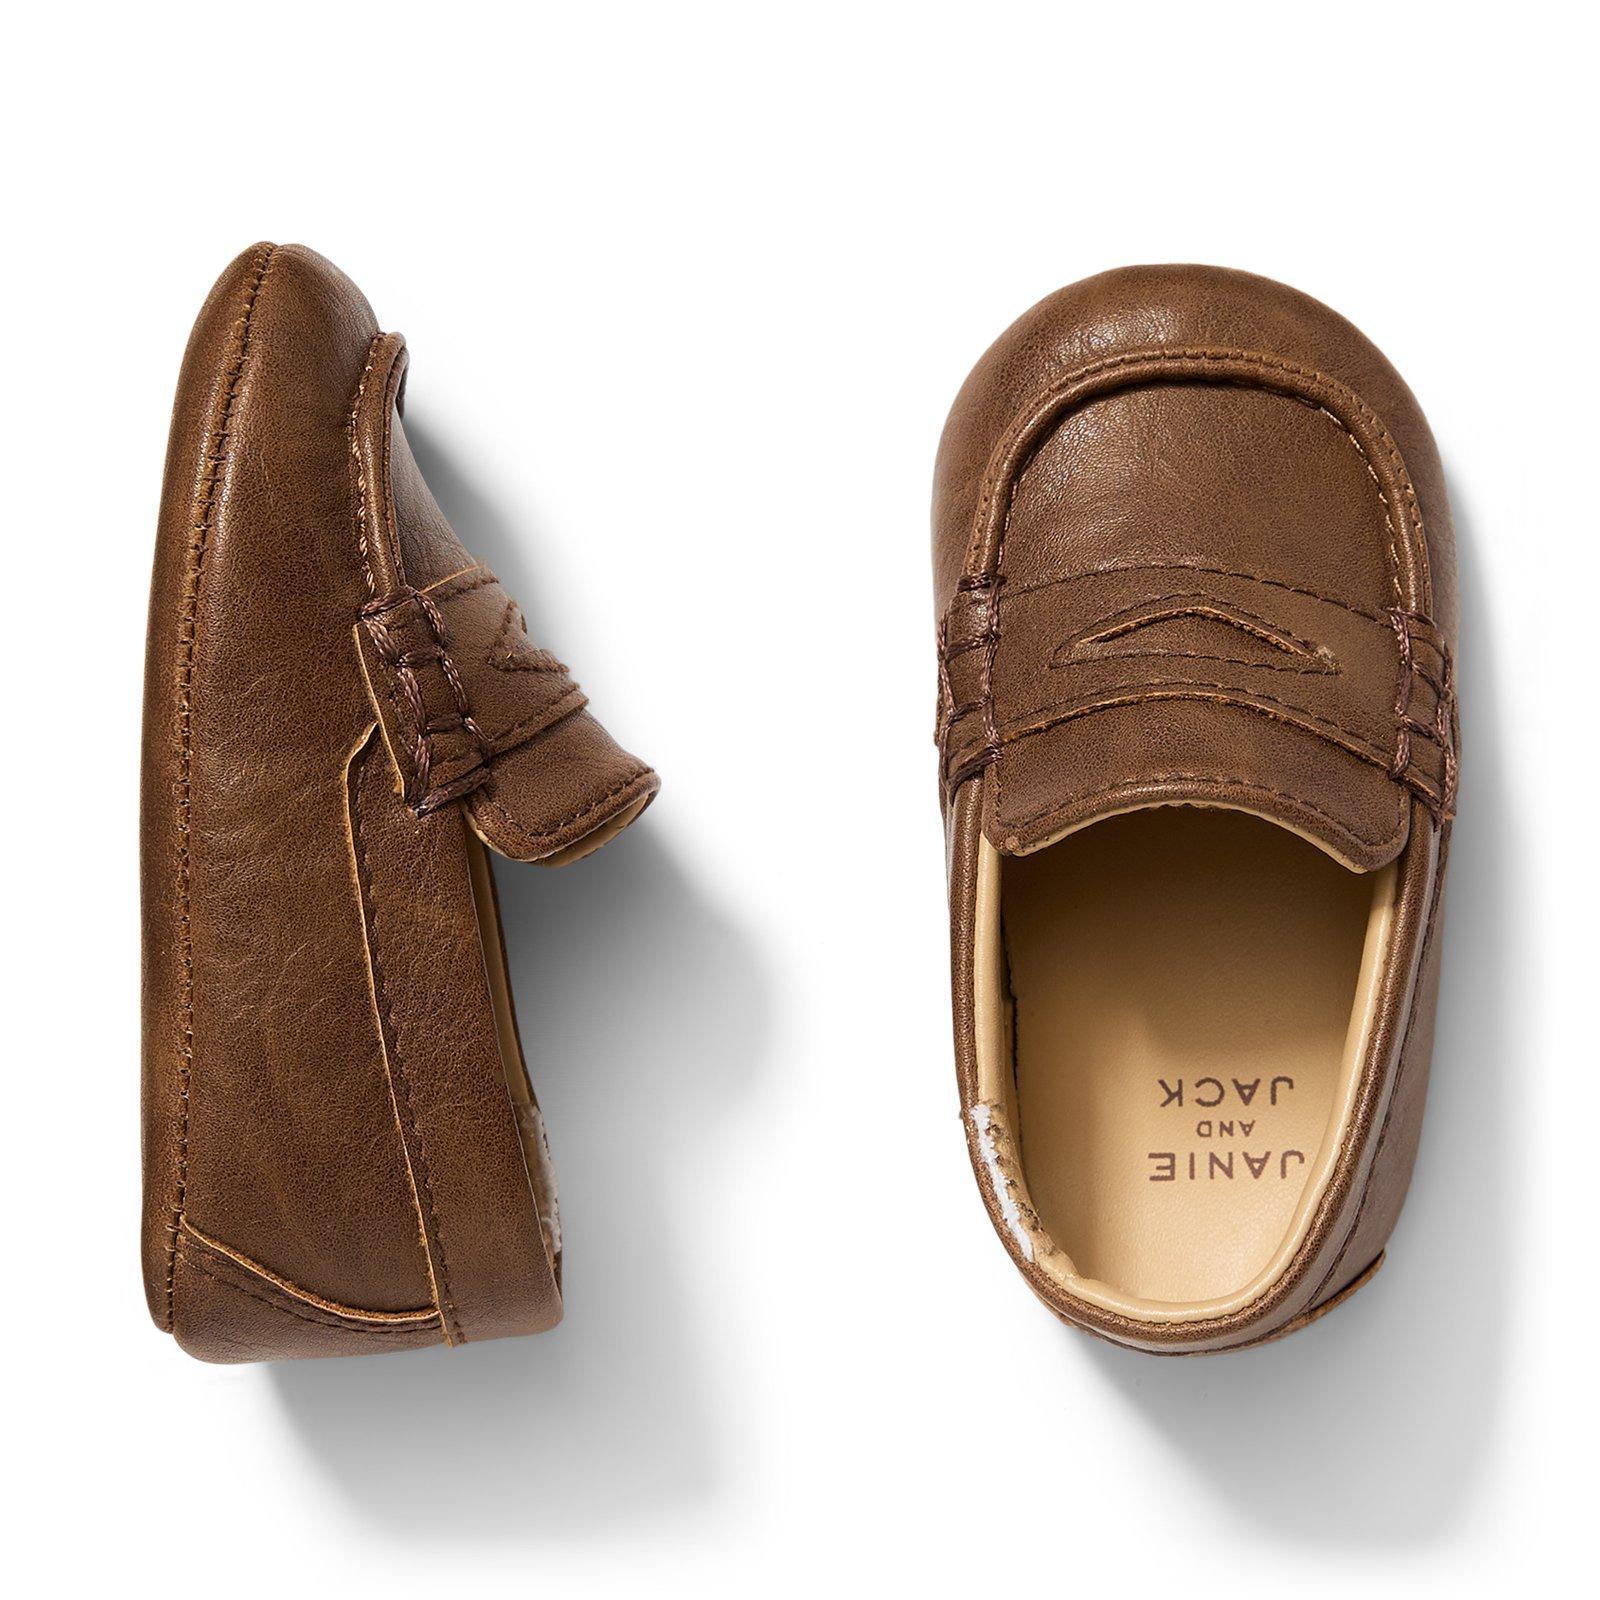 Penny Loafer Crib Shoe